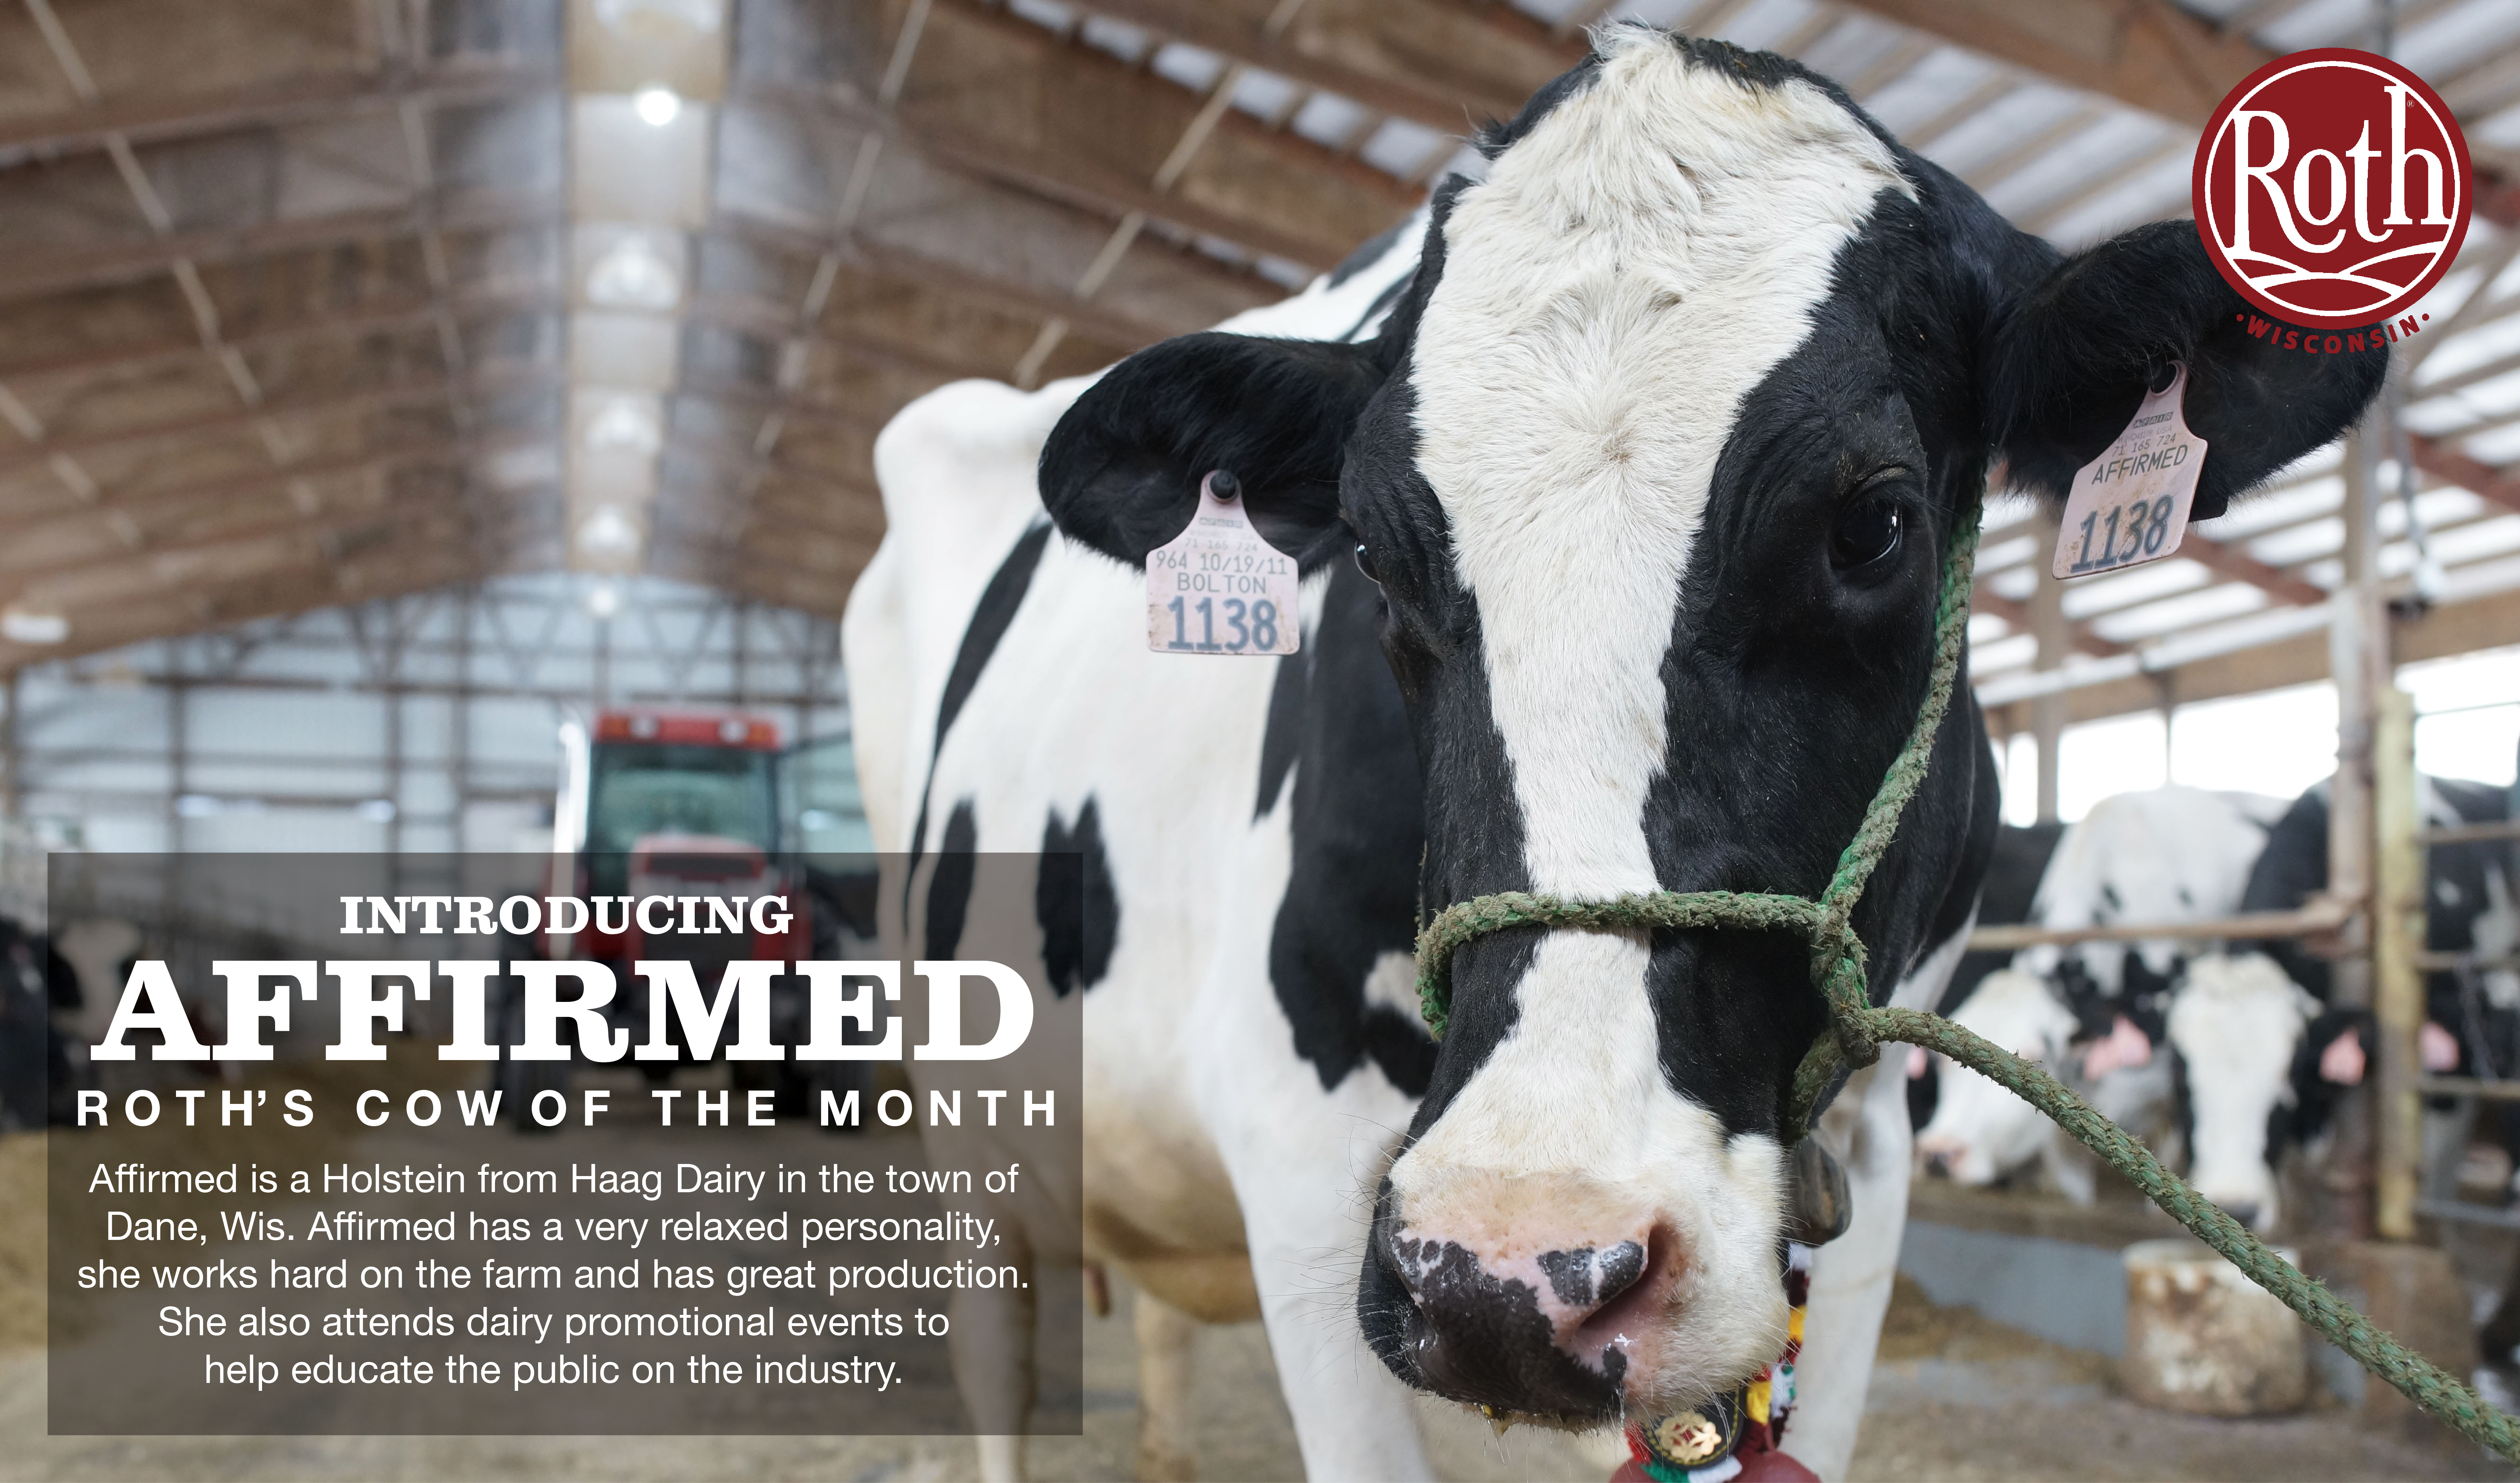 Affirmed: Roth Cheese's Cow of the Month. Find him at Haad Dairy Farm in Dane, Wisconsin